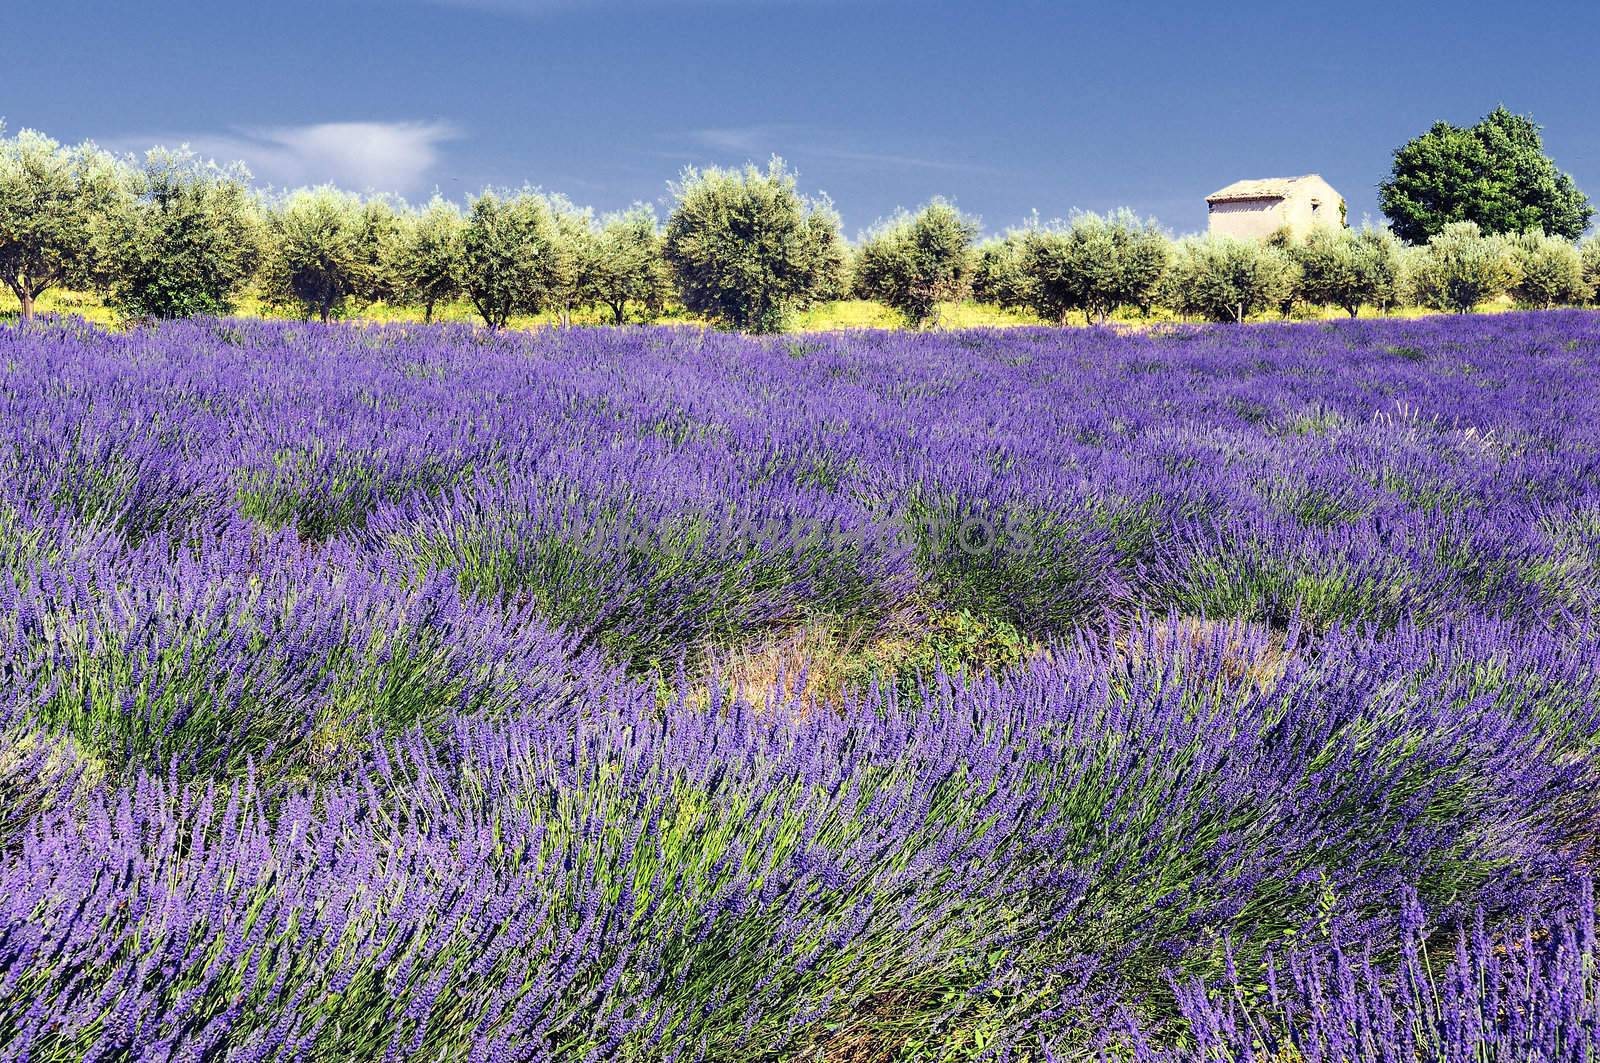 Image shows a lavender field in the region of Provence, southern France